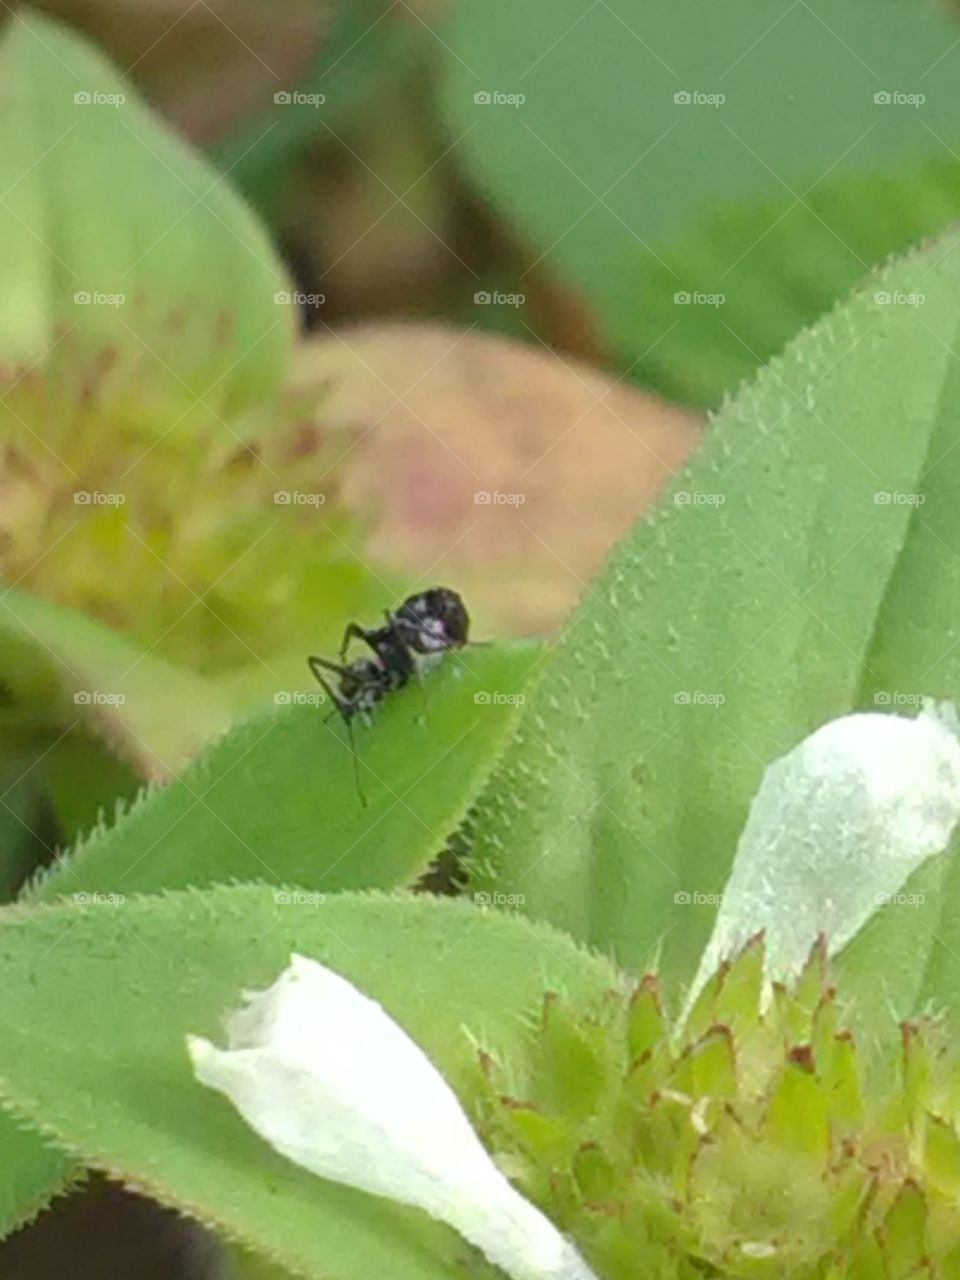 The beautiful ant runing on the leaf.